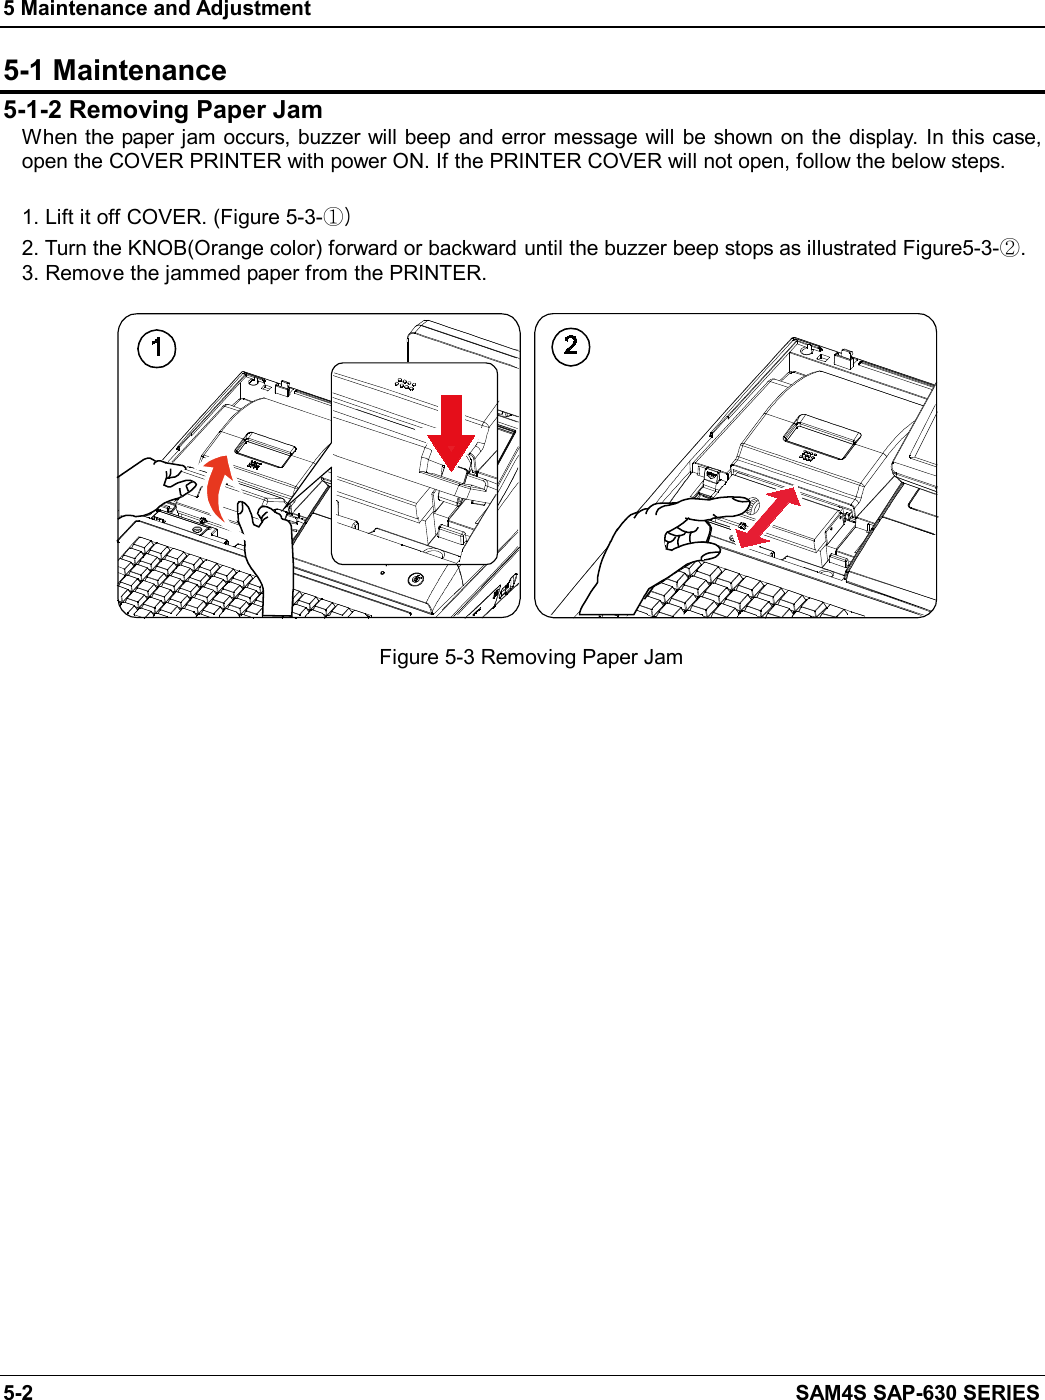 5 Maintenance and Adjustment5-2 SAM4S SAP-630 SERIES5-1 Maintenance5-1-2 Removing Paper JamWhen the paper jam occurs, buzzer will beepand  error message will be shown on the display. In this case,open the COVER PRINTER with power ON. If the PRINTER COVER will not open, follow the below steps.1. Lift it off COVER. (Figure 5-3-①)2. Turn the KNOB(Orange color) forward or backward until the buzzer beep stops as illustrated Figure5-3-②.3. Remove the jammed paper from the PRINTER.Figure 5-3 Removing Paper Jam